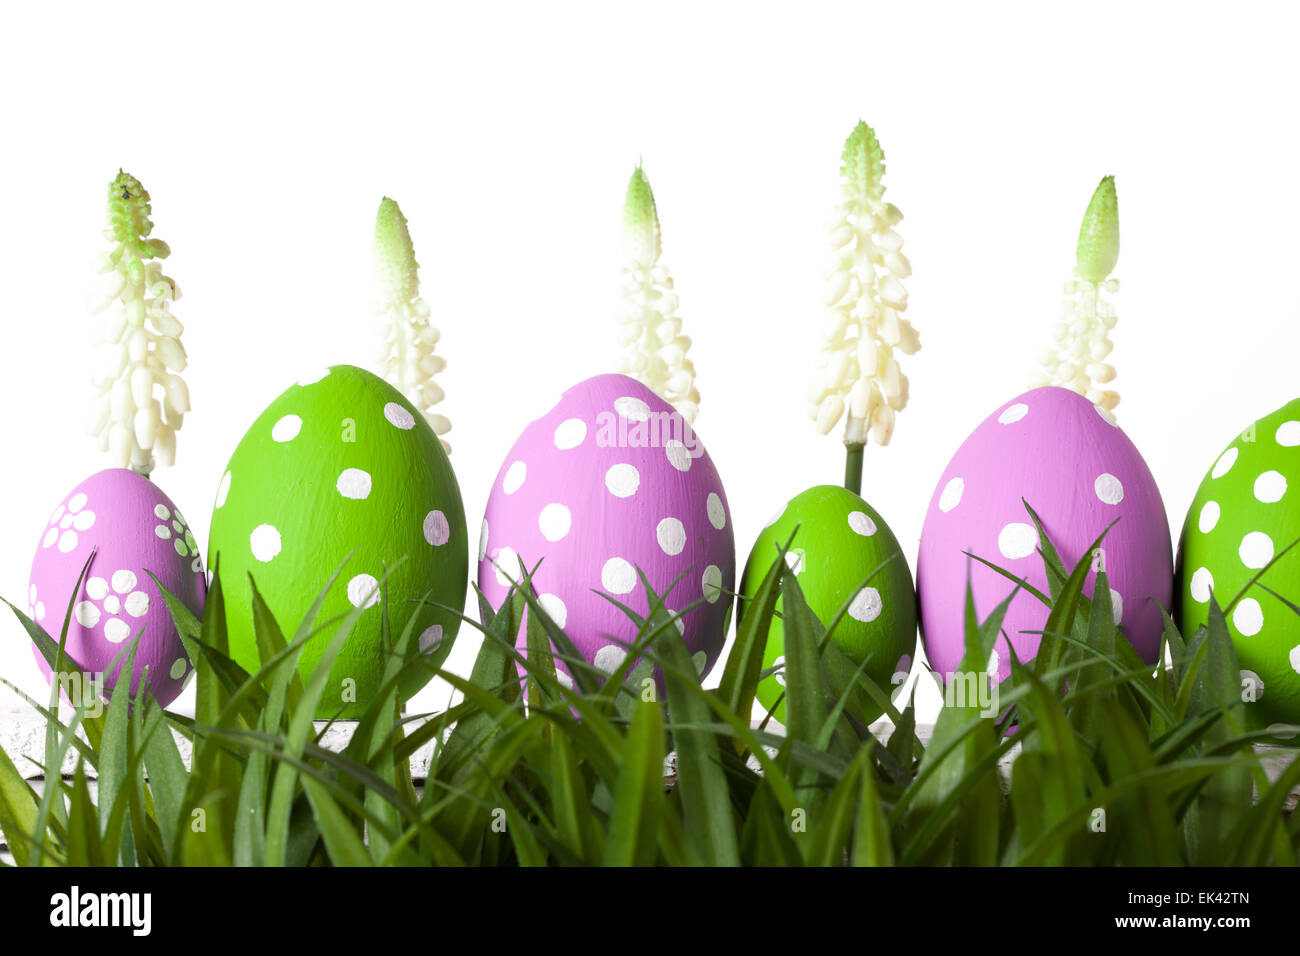 Row of Easter eggs in Fresh Green Grass Stock Photo